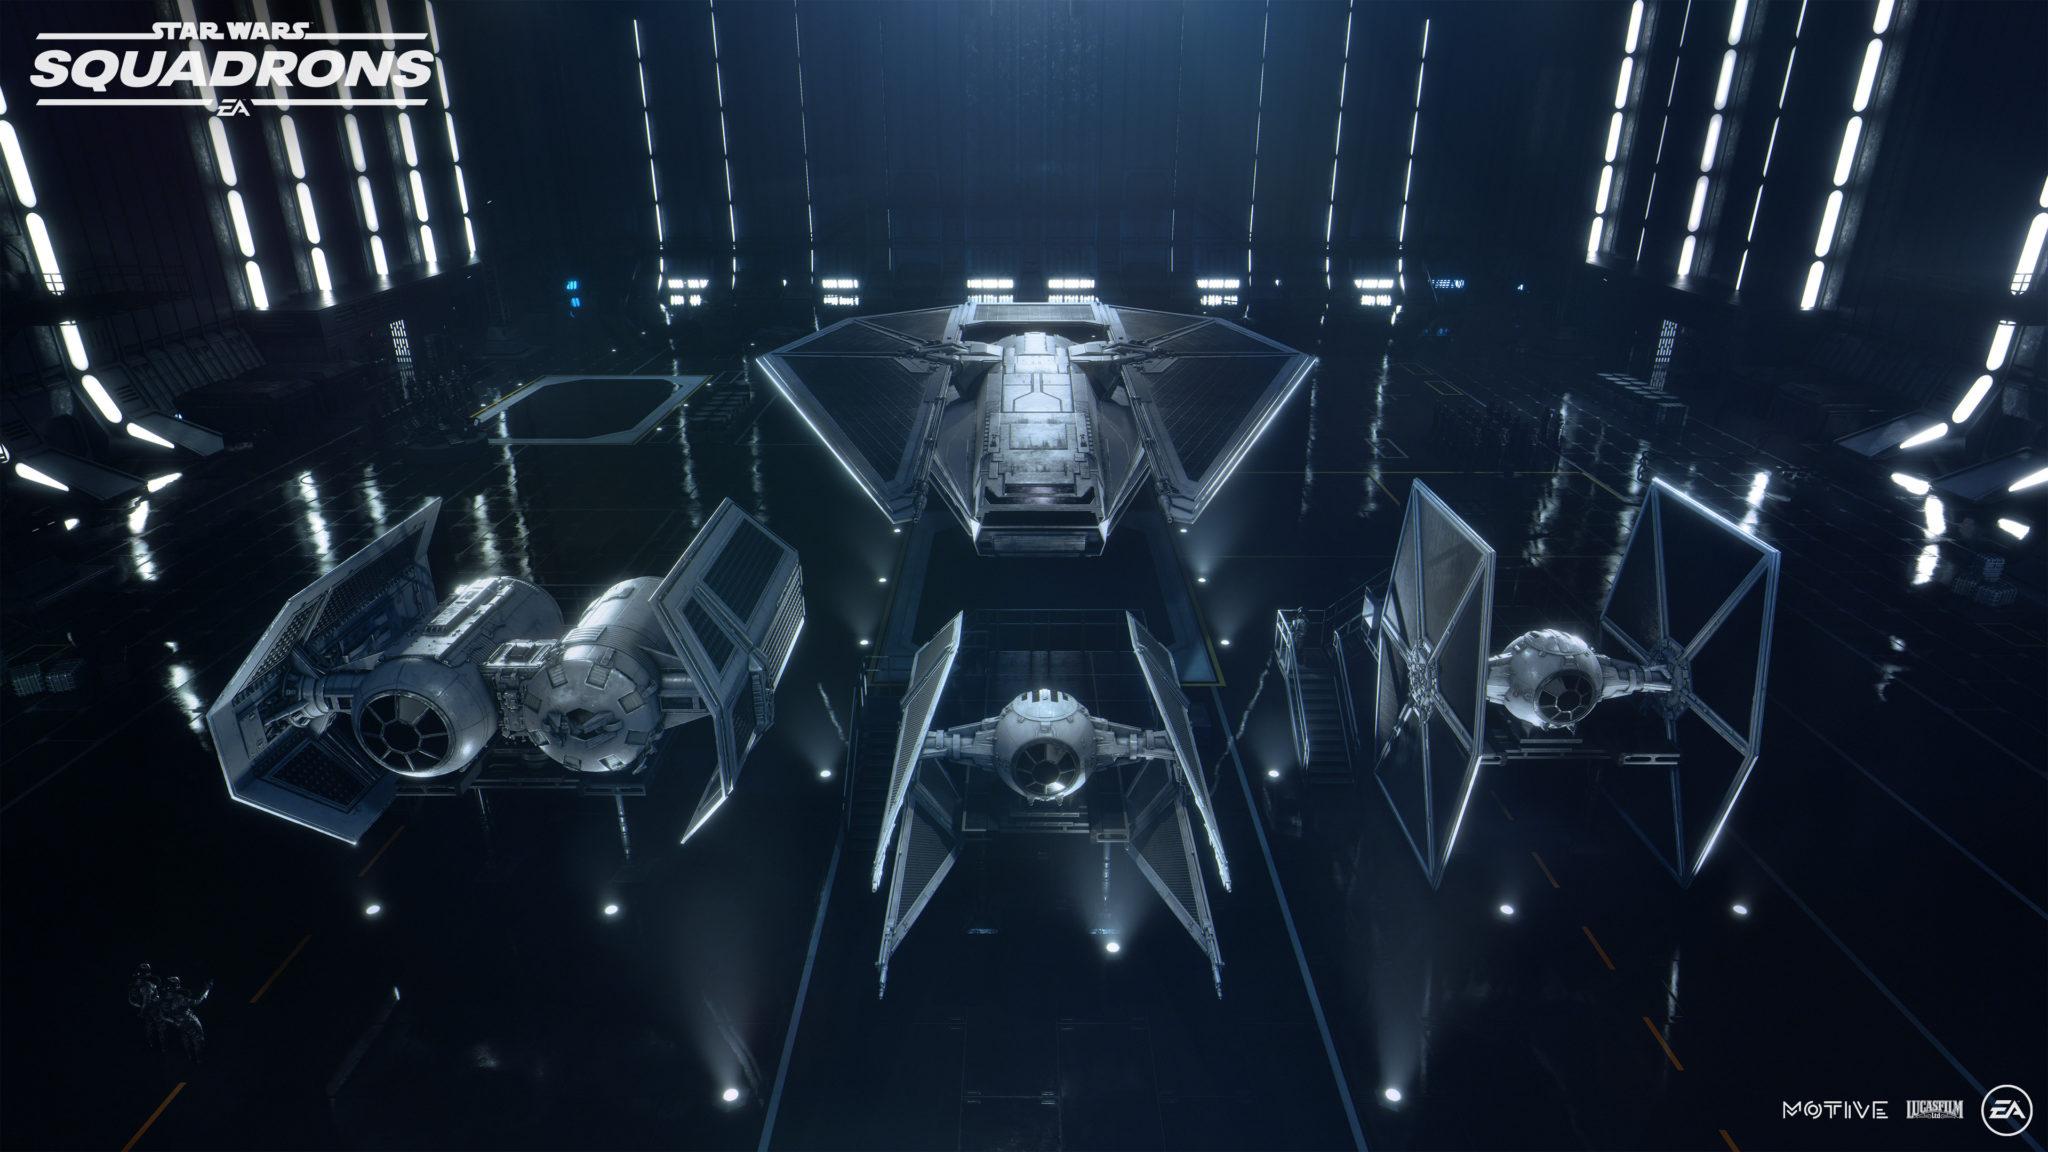 Star Wars: Squadrons has officially been revealed, and now we know a bit more about the game.